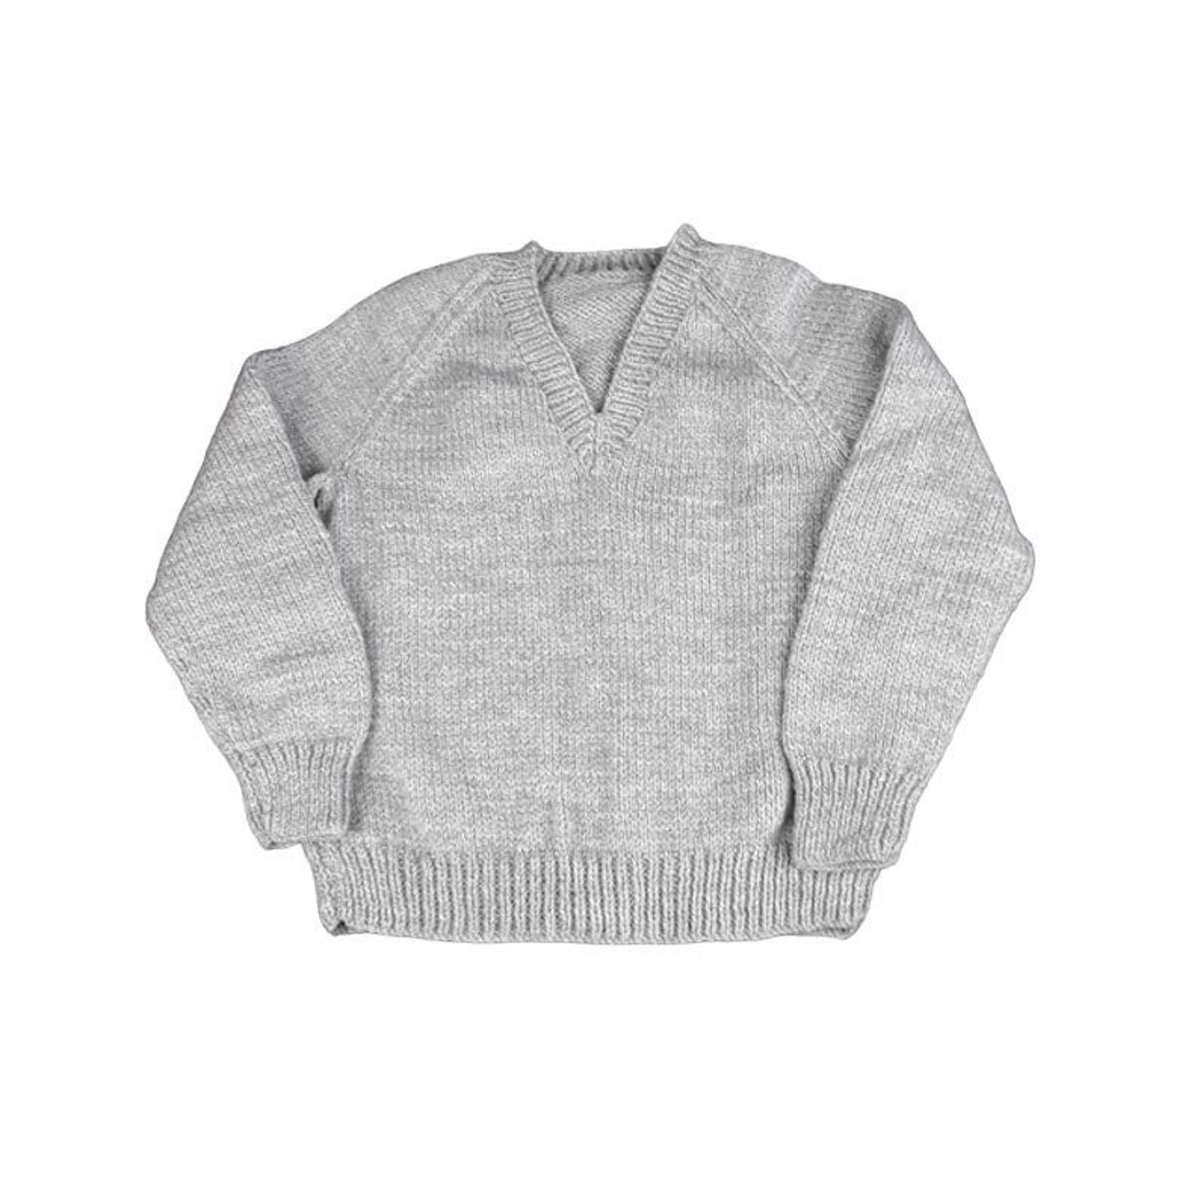 Check out this adorable hand-knitted light grey v-neck jumper for children aged 5-6 years! Made with love and care, it's the perfect addition to your little one's wardrobe. Get it now on #Etsy. knittingtopia.etsy.com/listing/169363… #knittingtopia #handmade #MHHSBD #craftbizparty